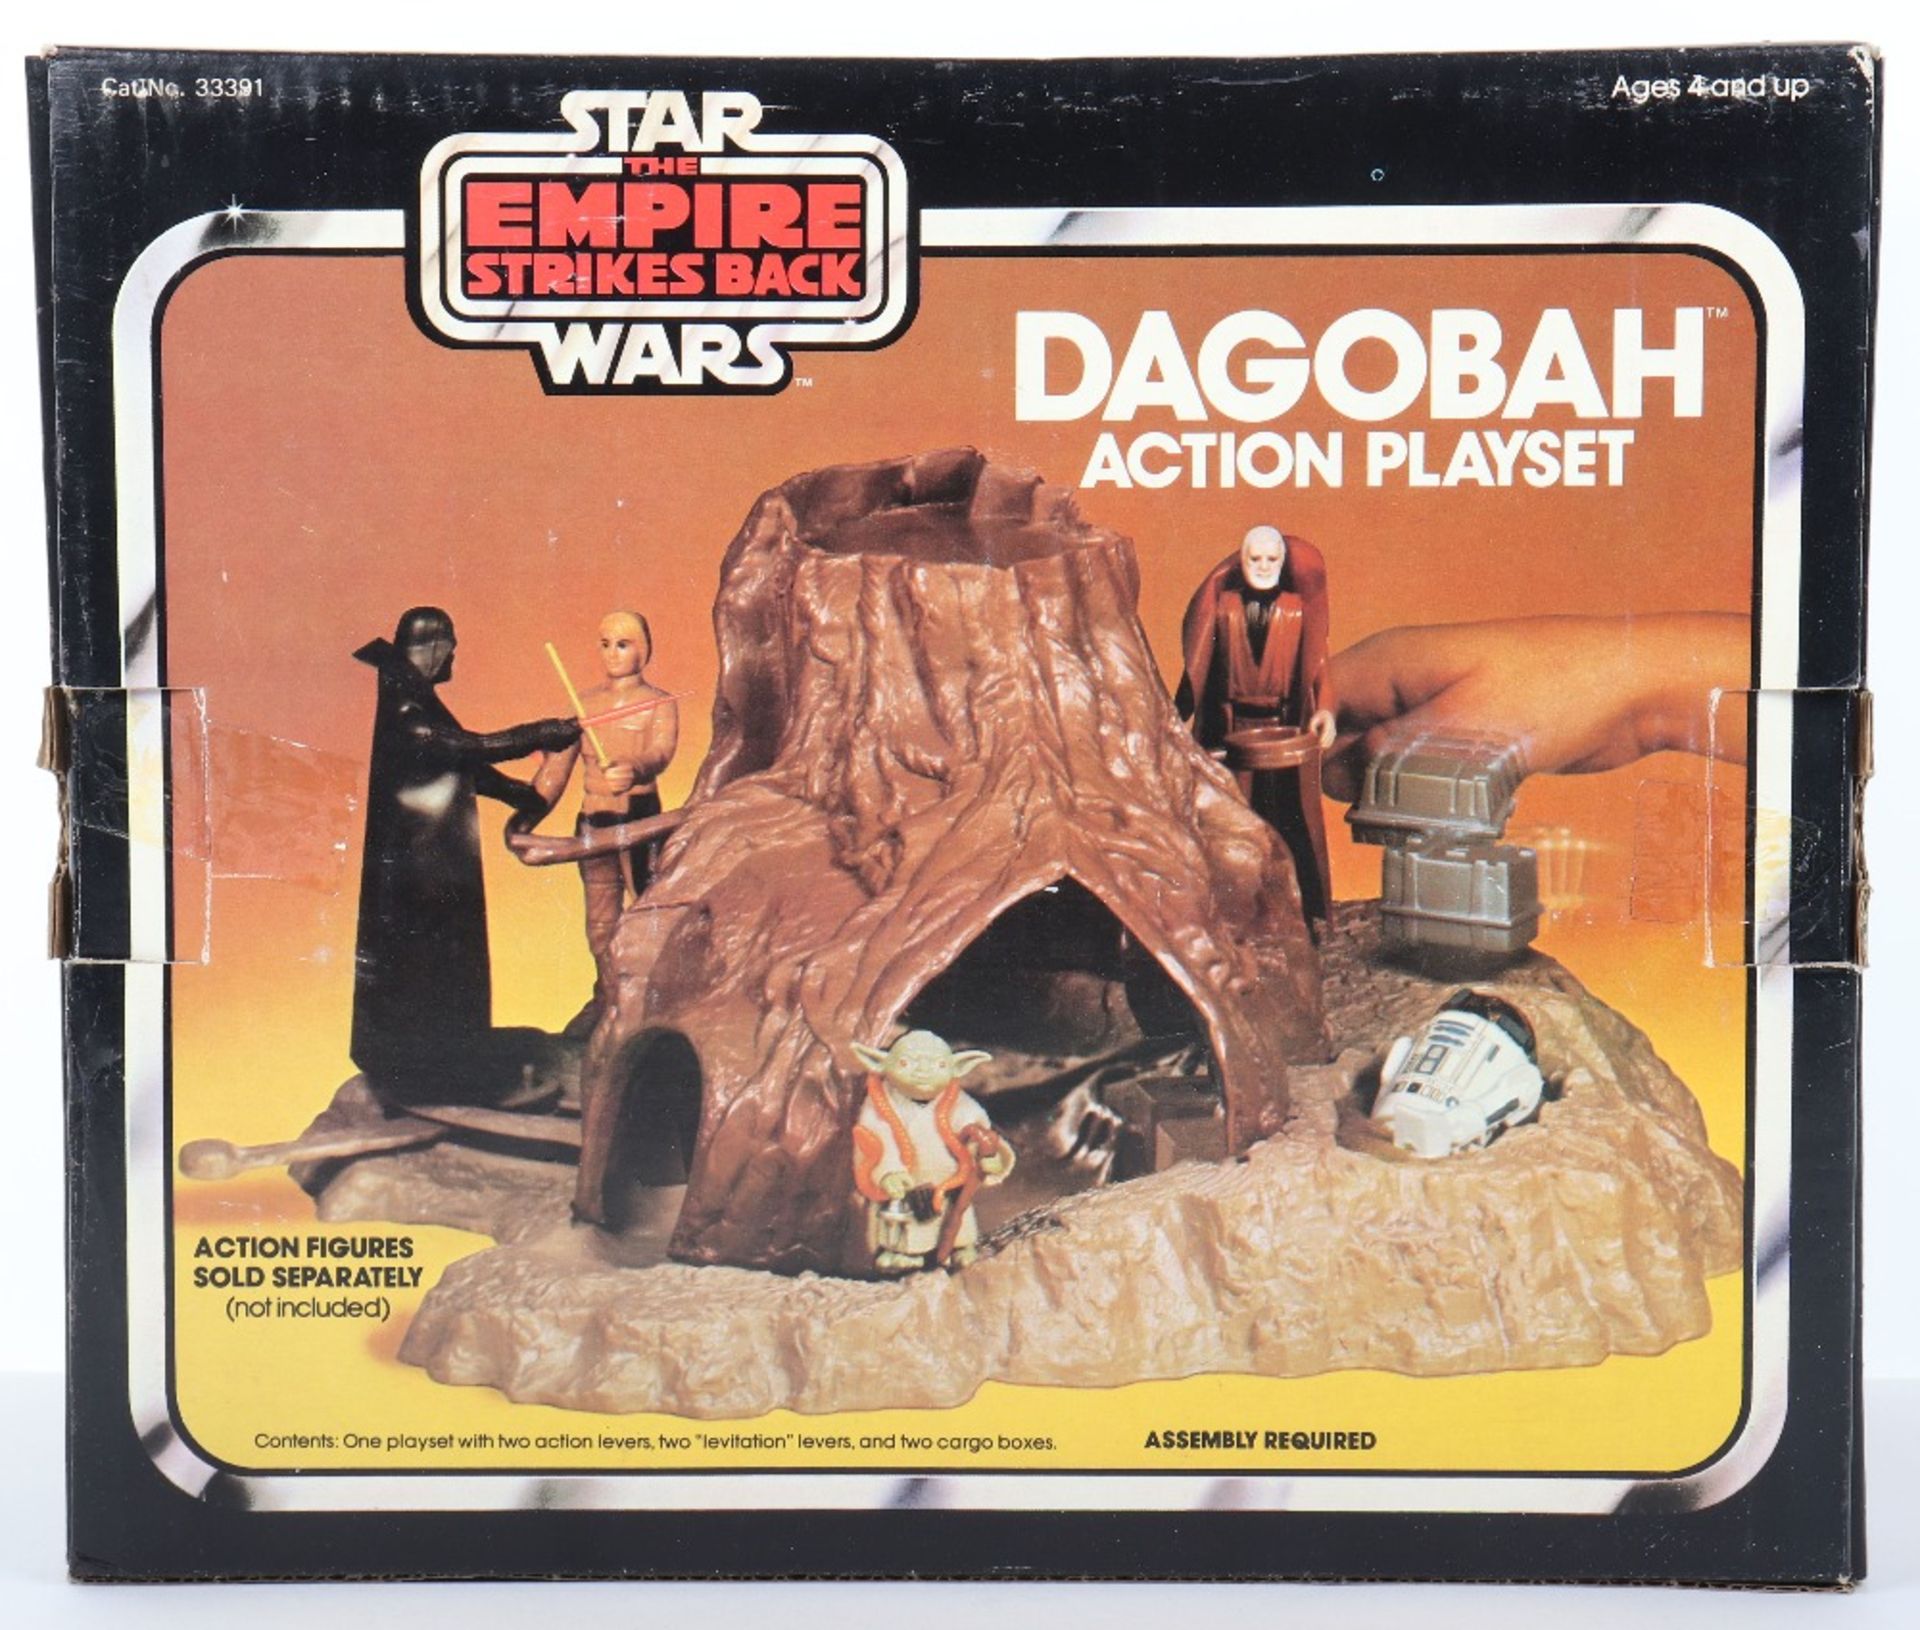 Boxed Palitoy Star Wars The Empire Strikes Back Dagobah Action Playset - Image 9 of 13